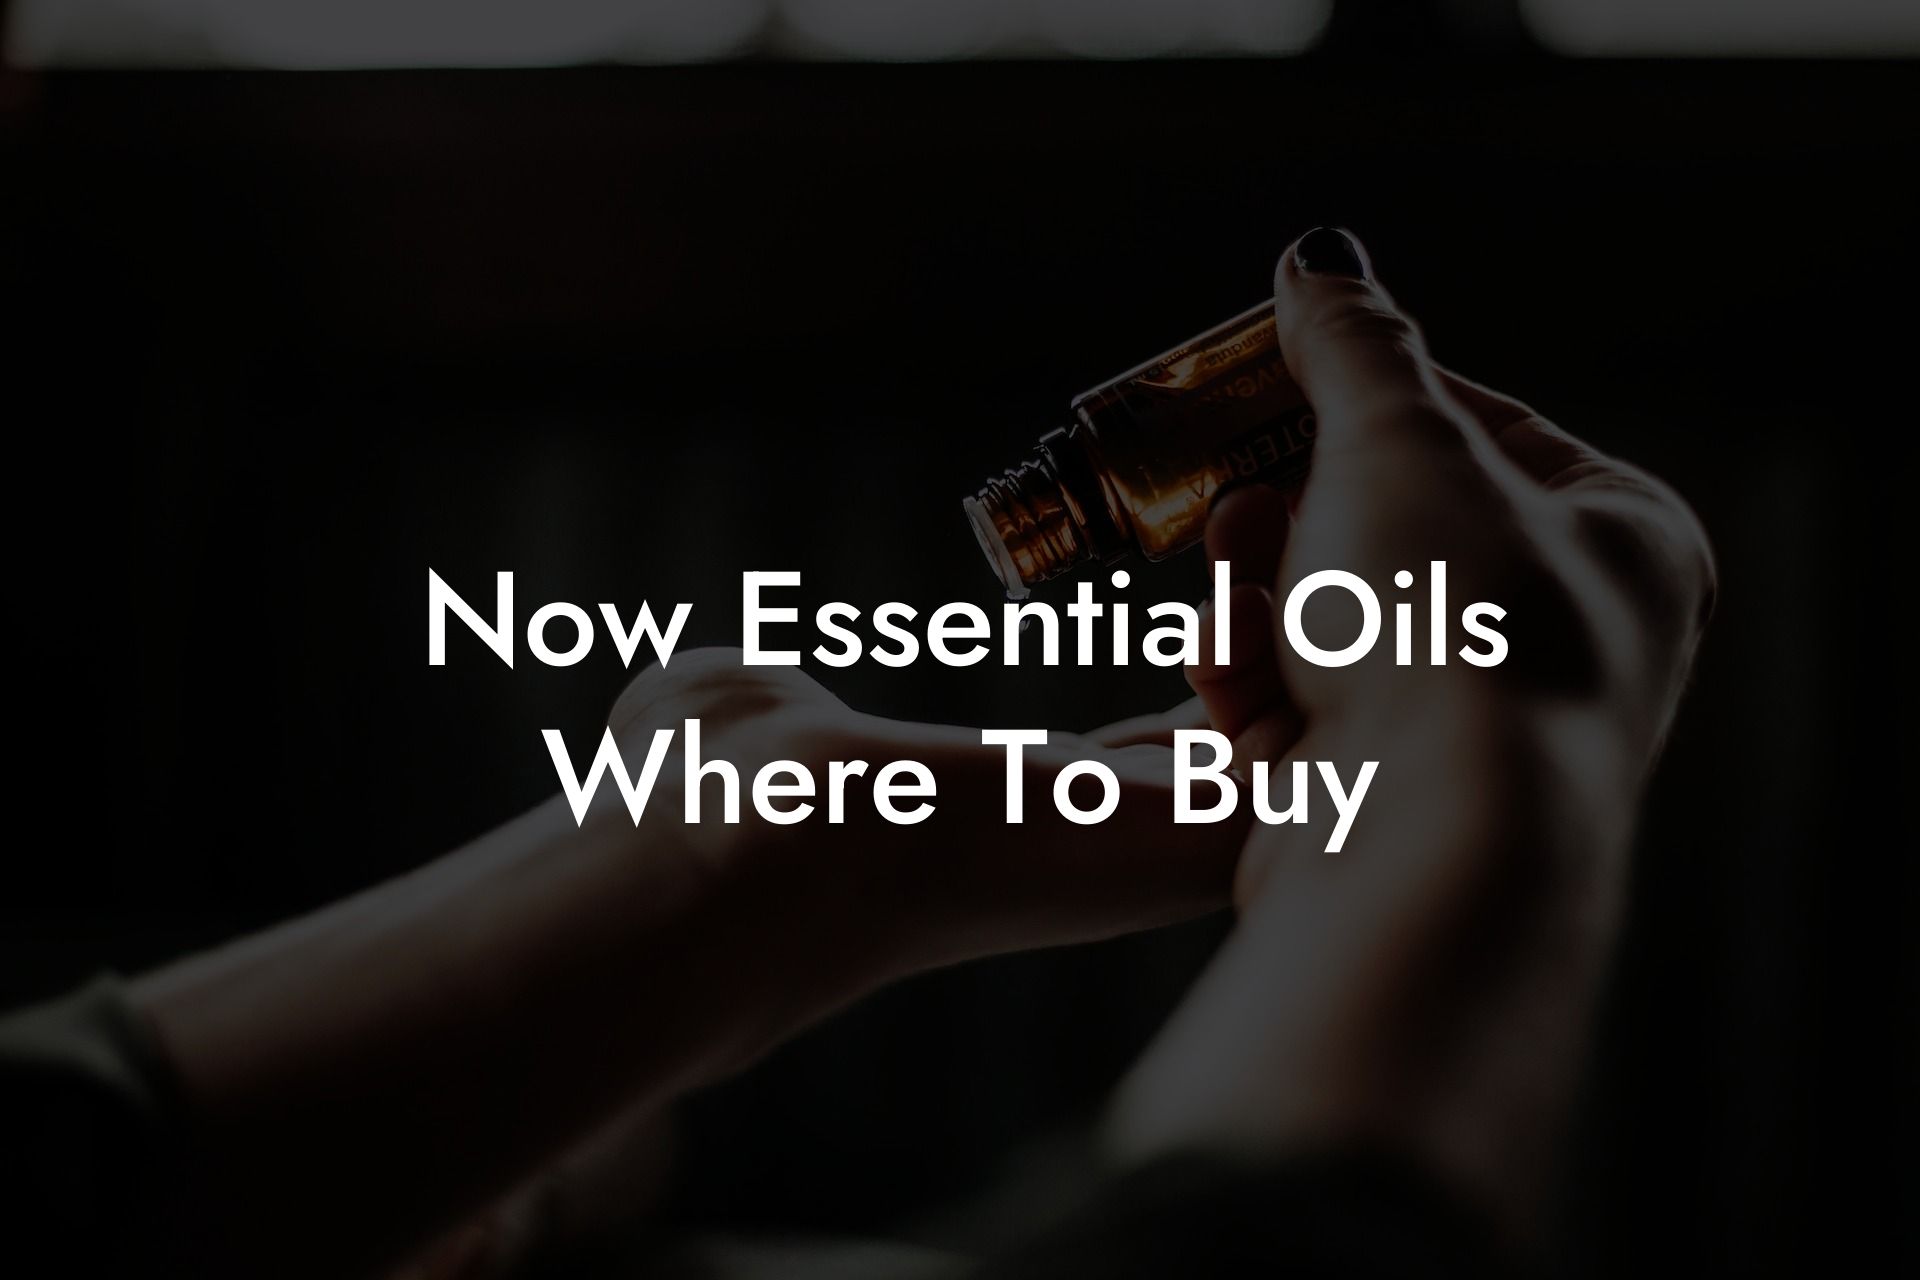 Now Essential Oils Where To Buy